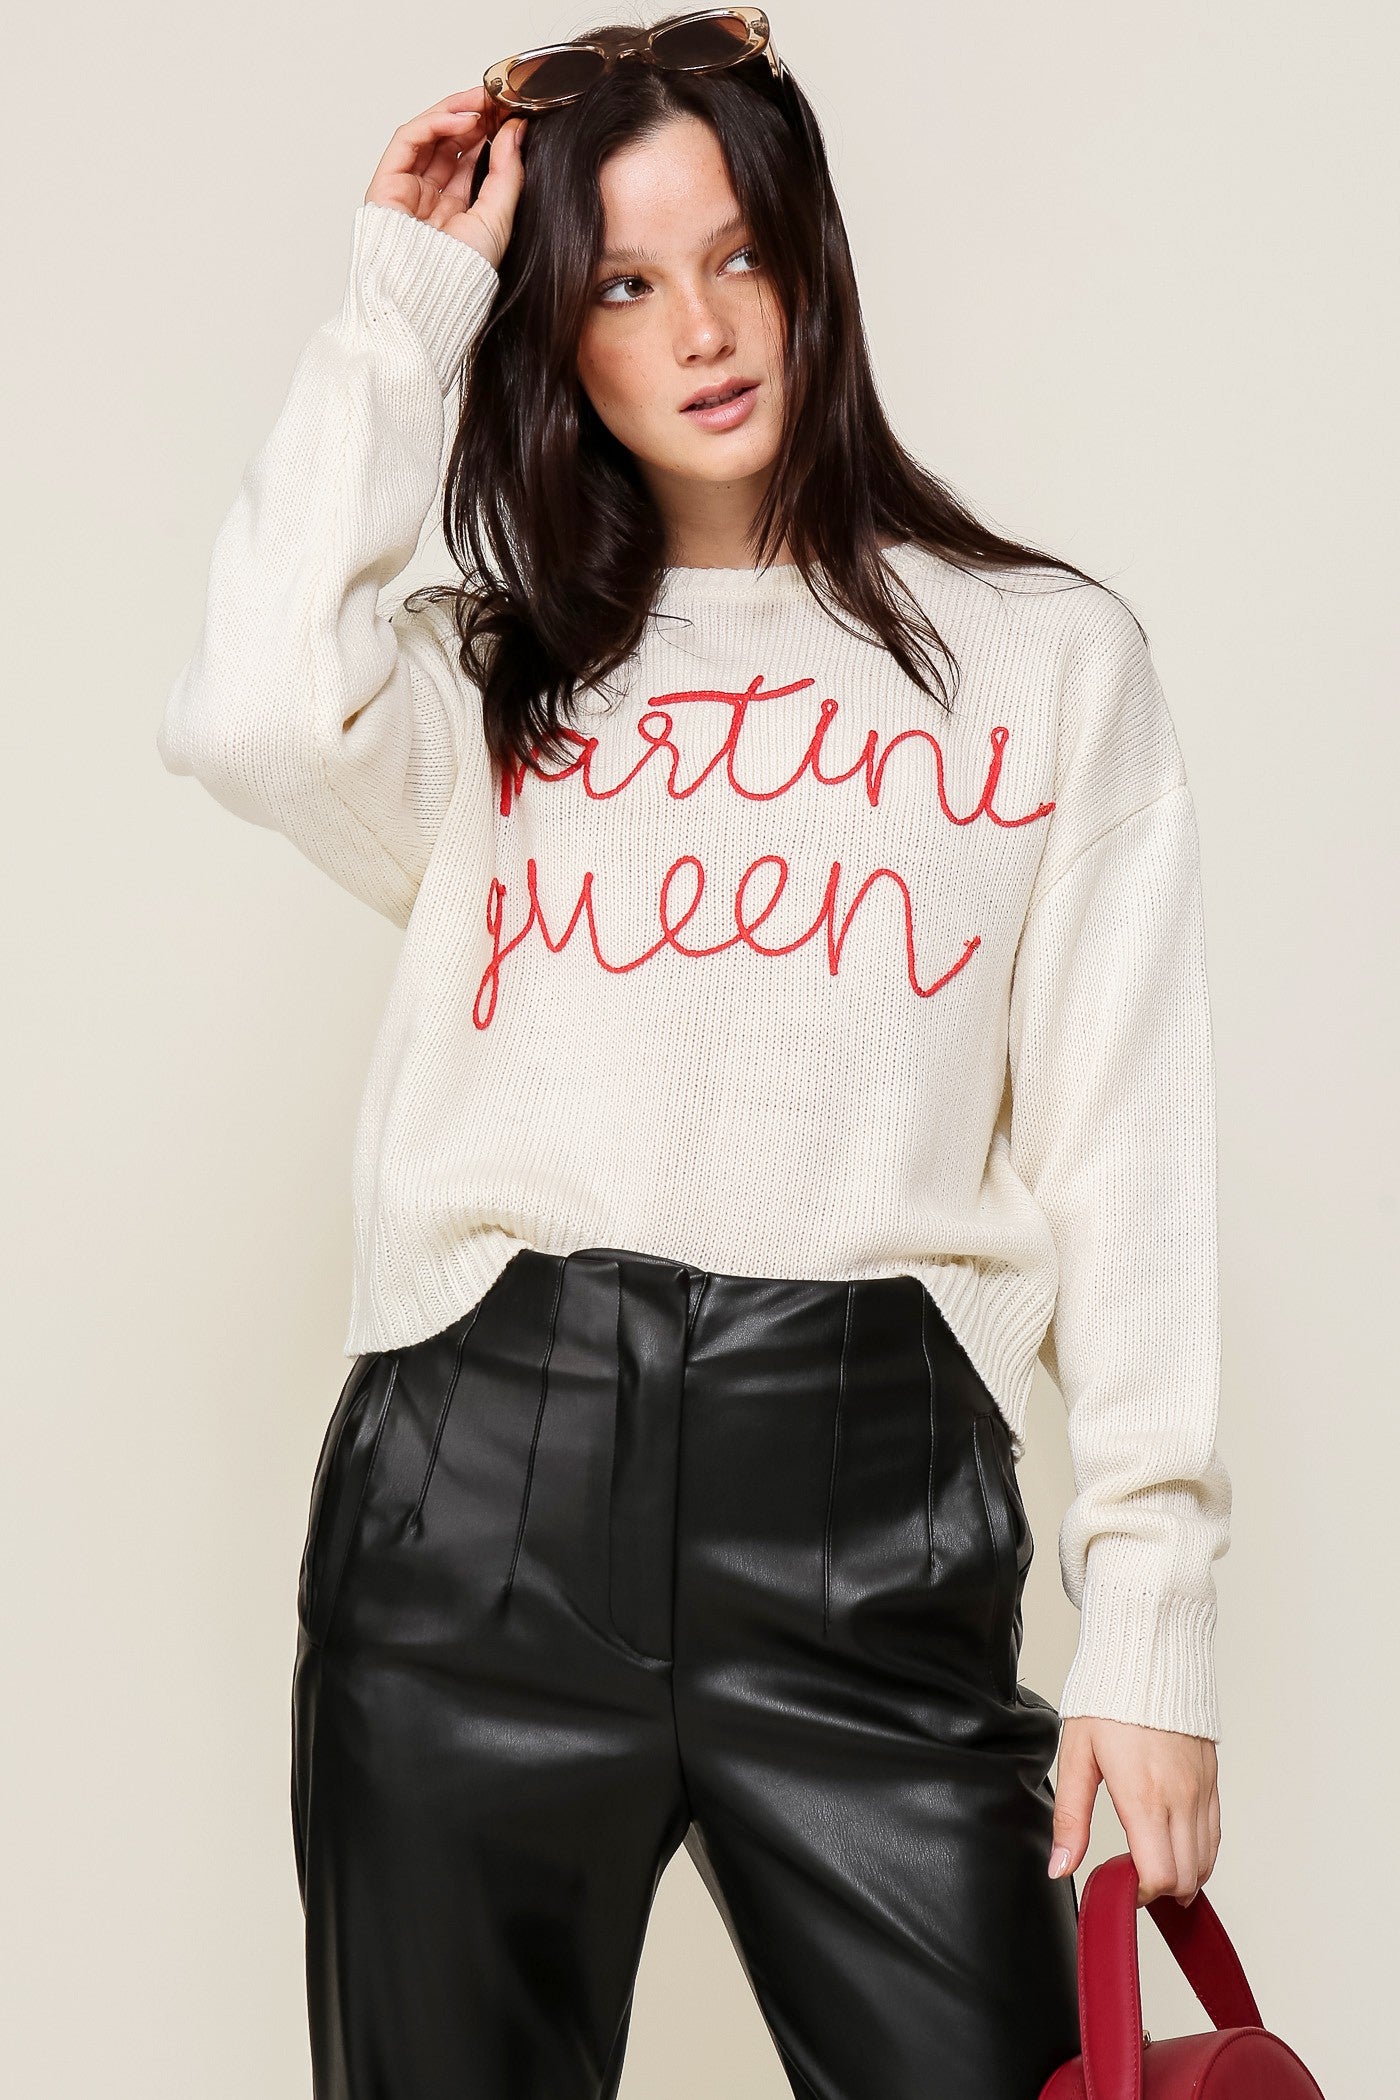 On Wednesday Pink Sweater – Defiant Boutique